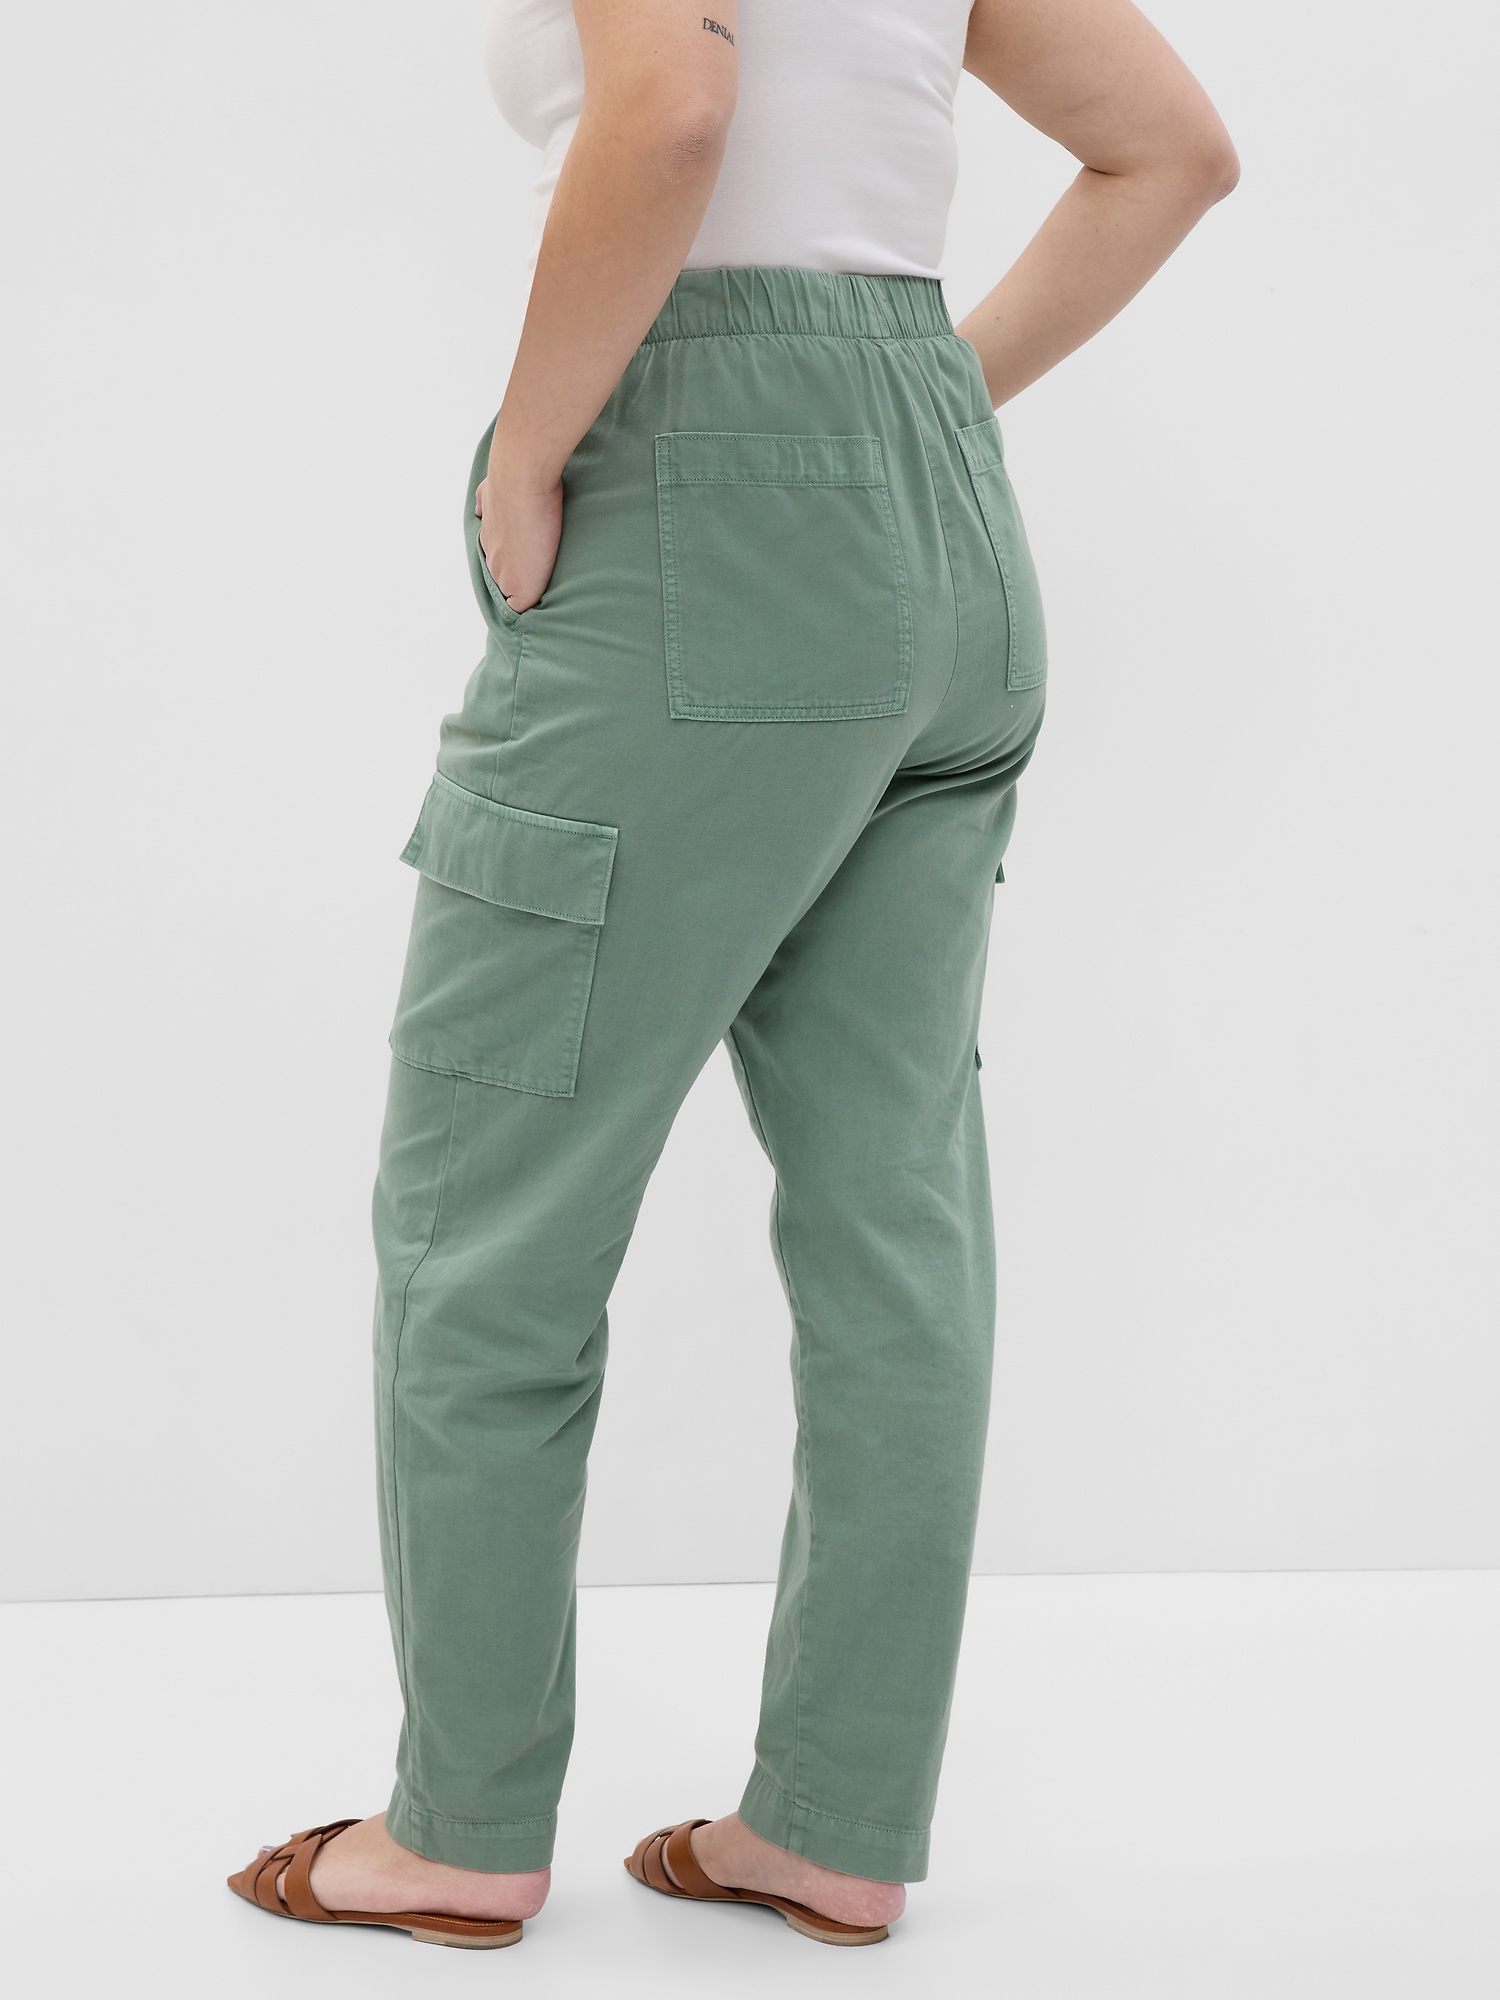 Guess Big Boys Twill Cargo Pants with Elastic Jogger Cuffs